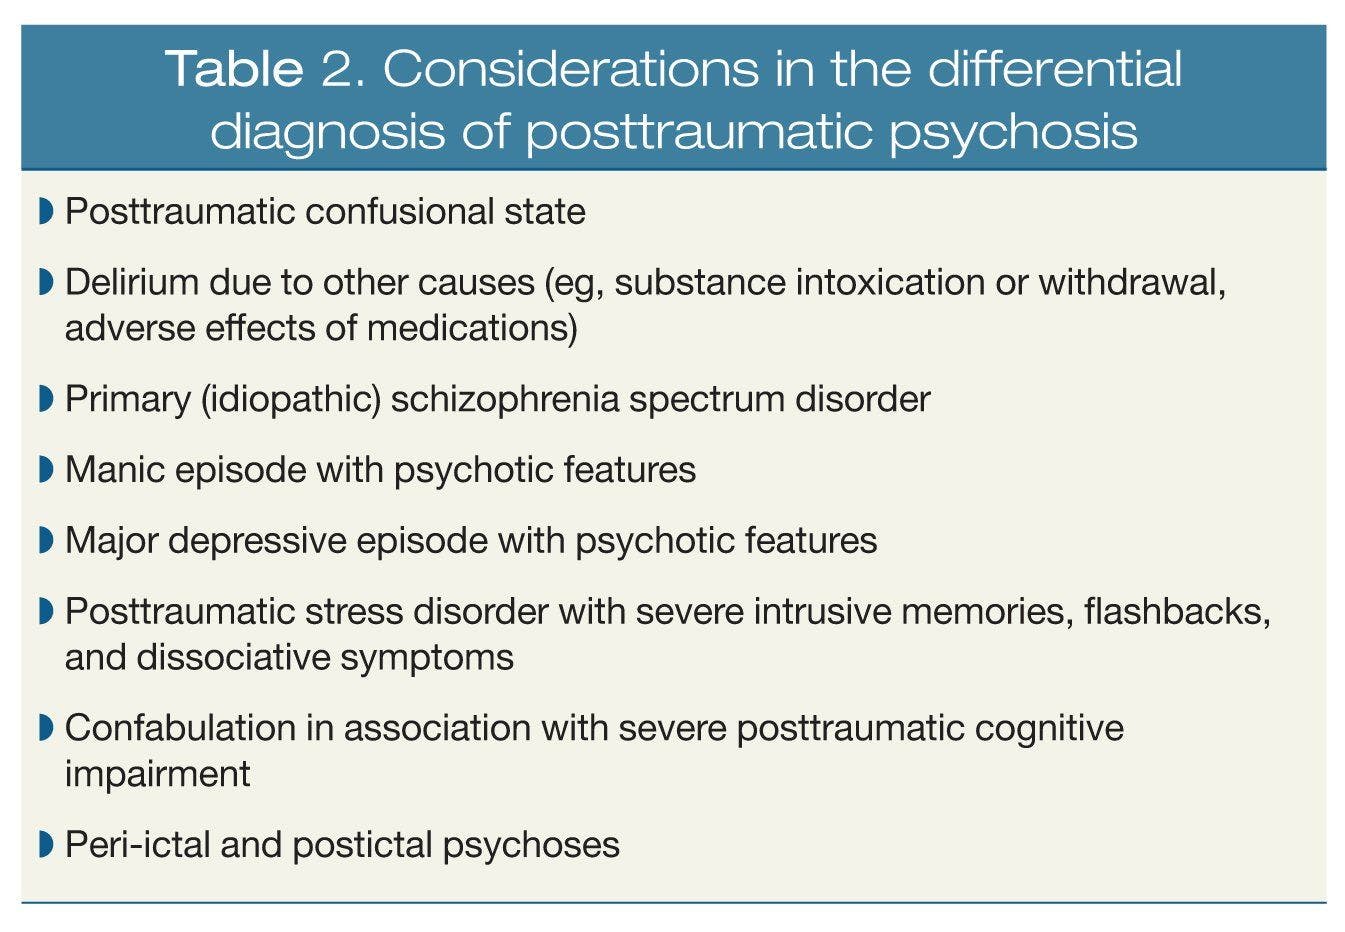 Considerations in the differential diagnosis of posttraumatic psychosis